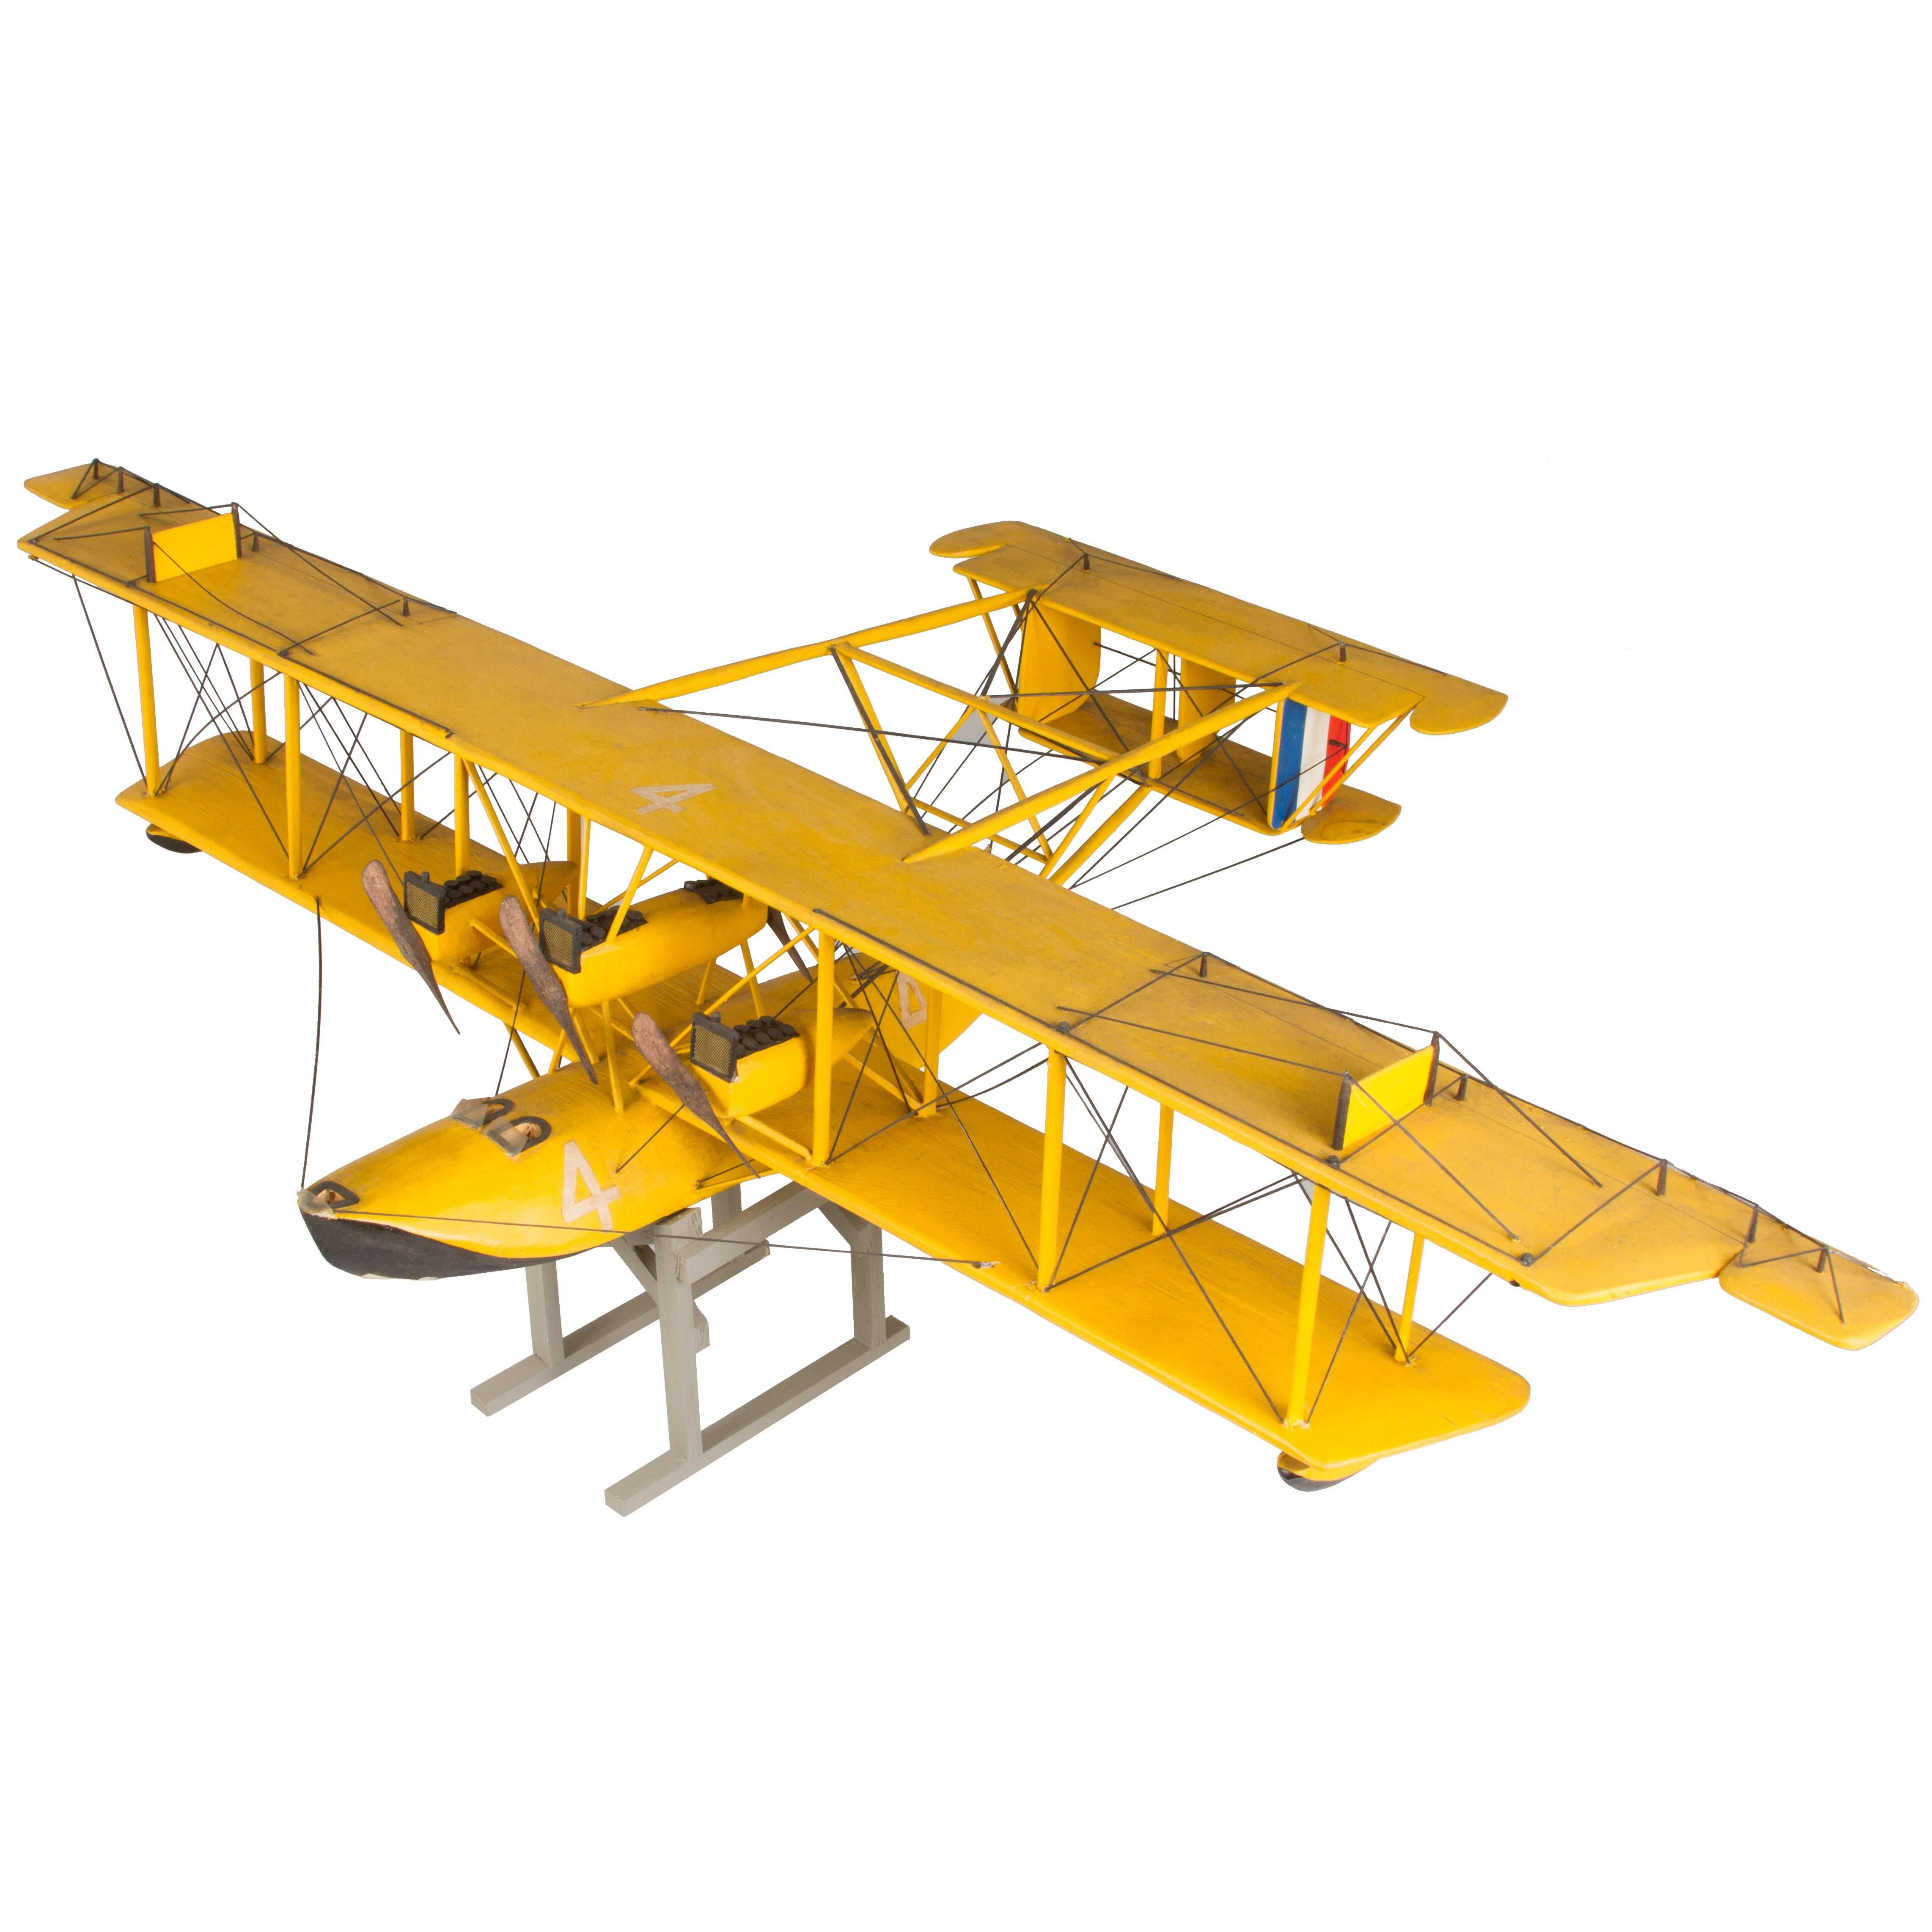 Handmade Model of a Curtiss NC-4 Seaplane For Sale